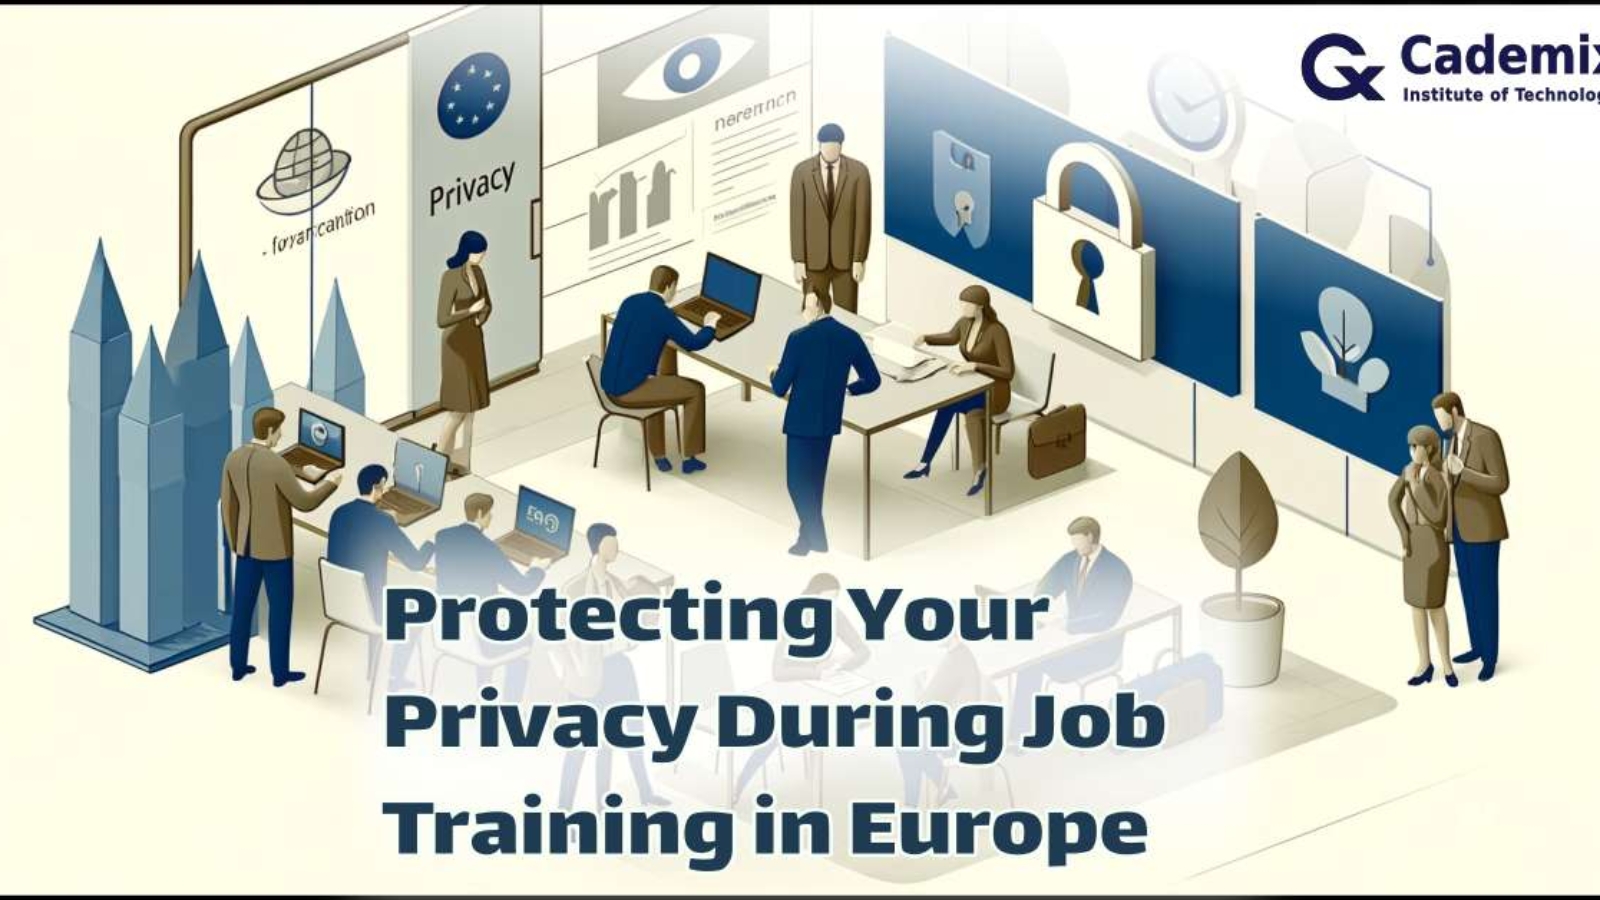 Protecting Your Privacy During Job Training in Europe